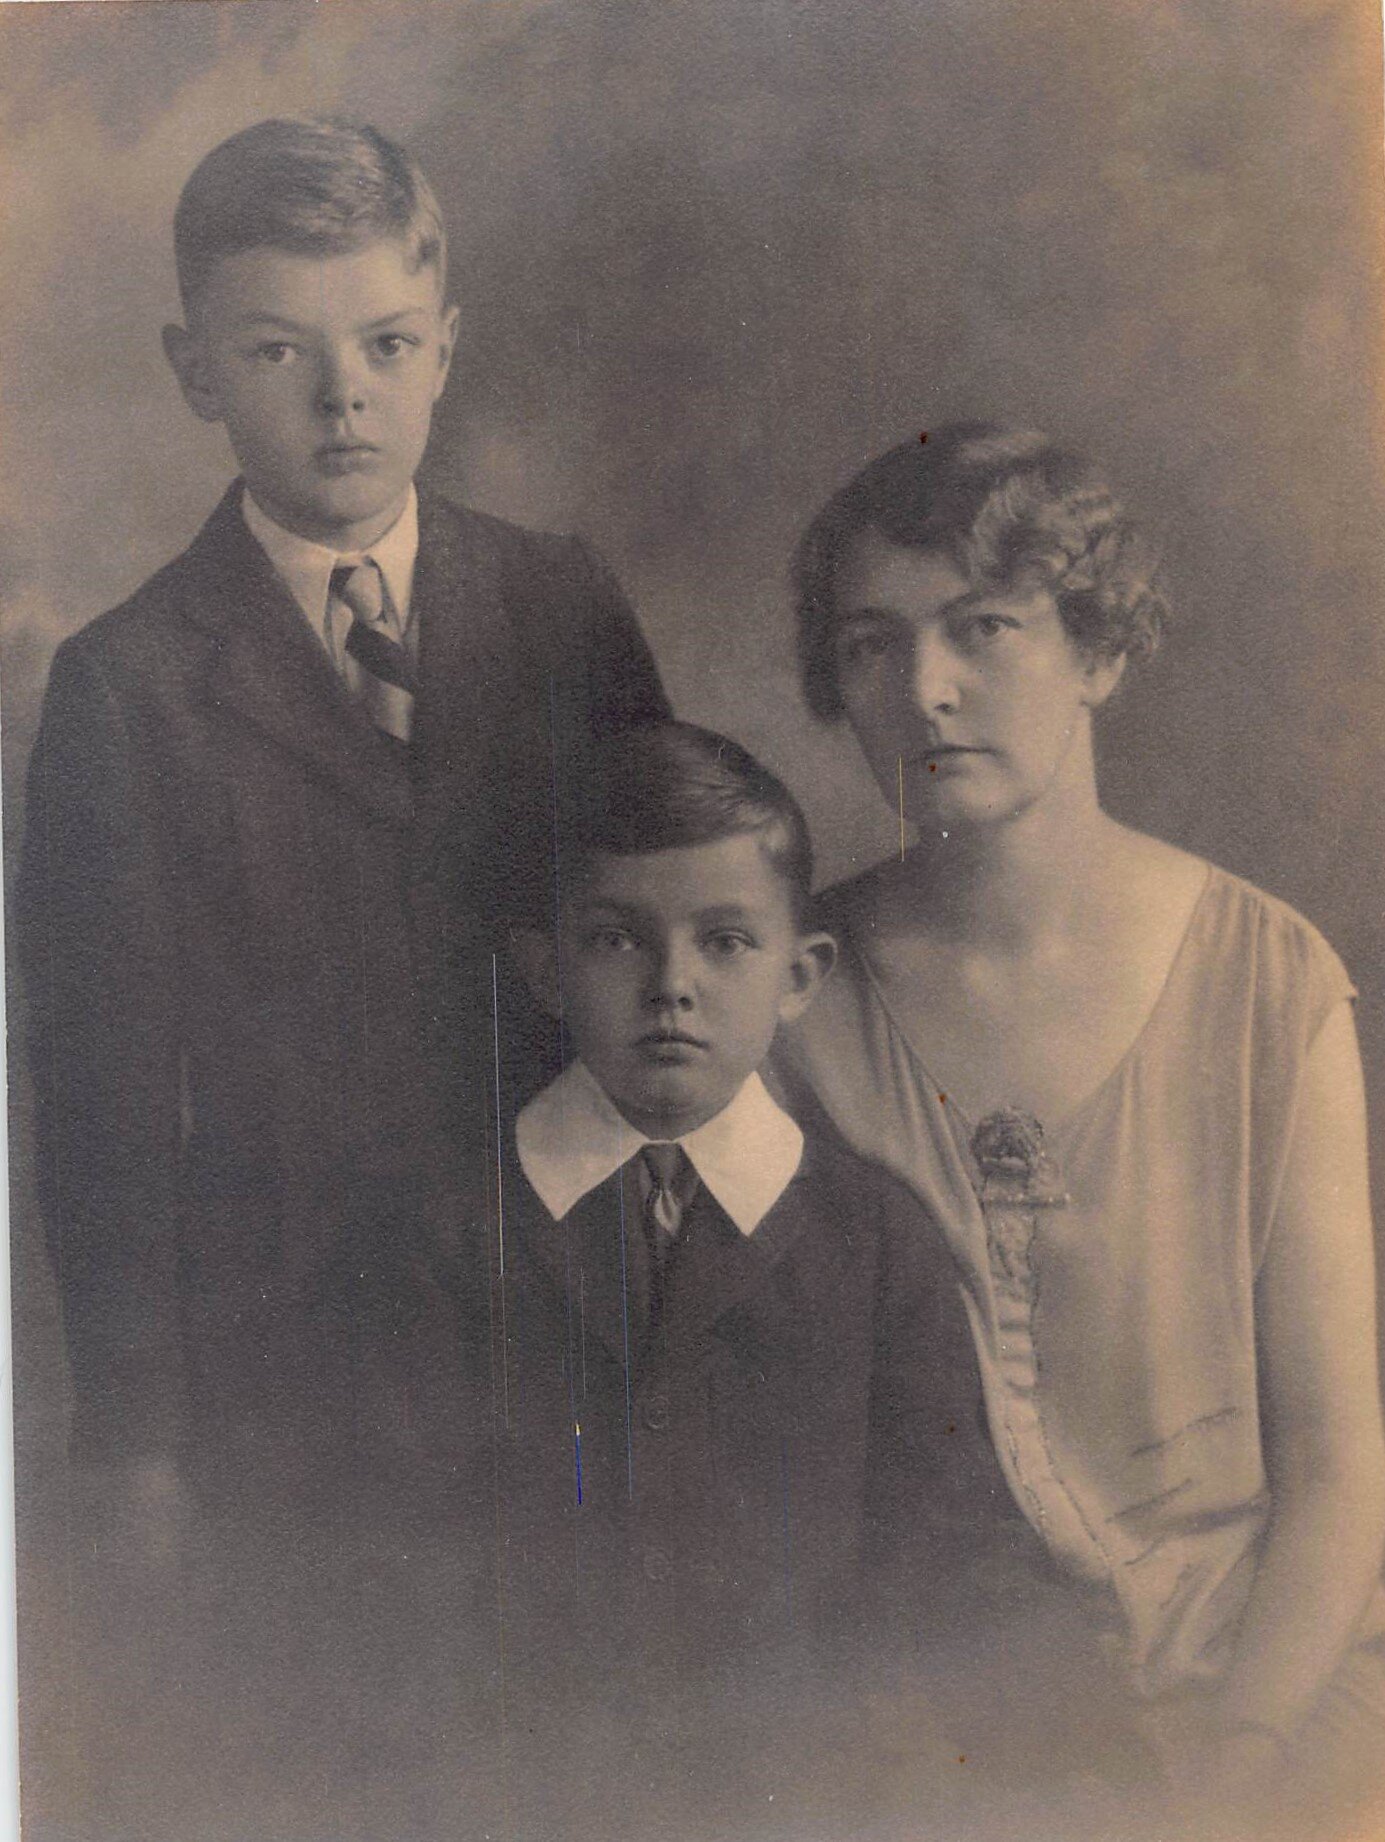  Sandy, David, and their mother, c early 1930s 